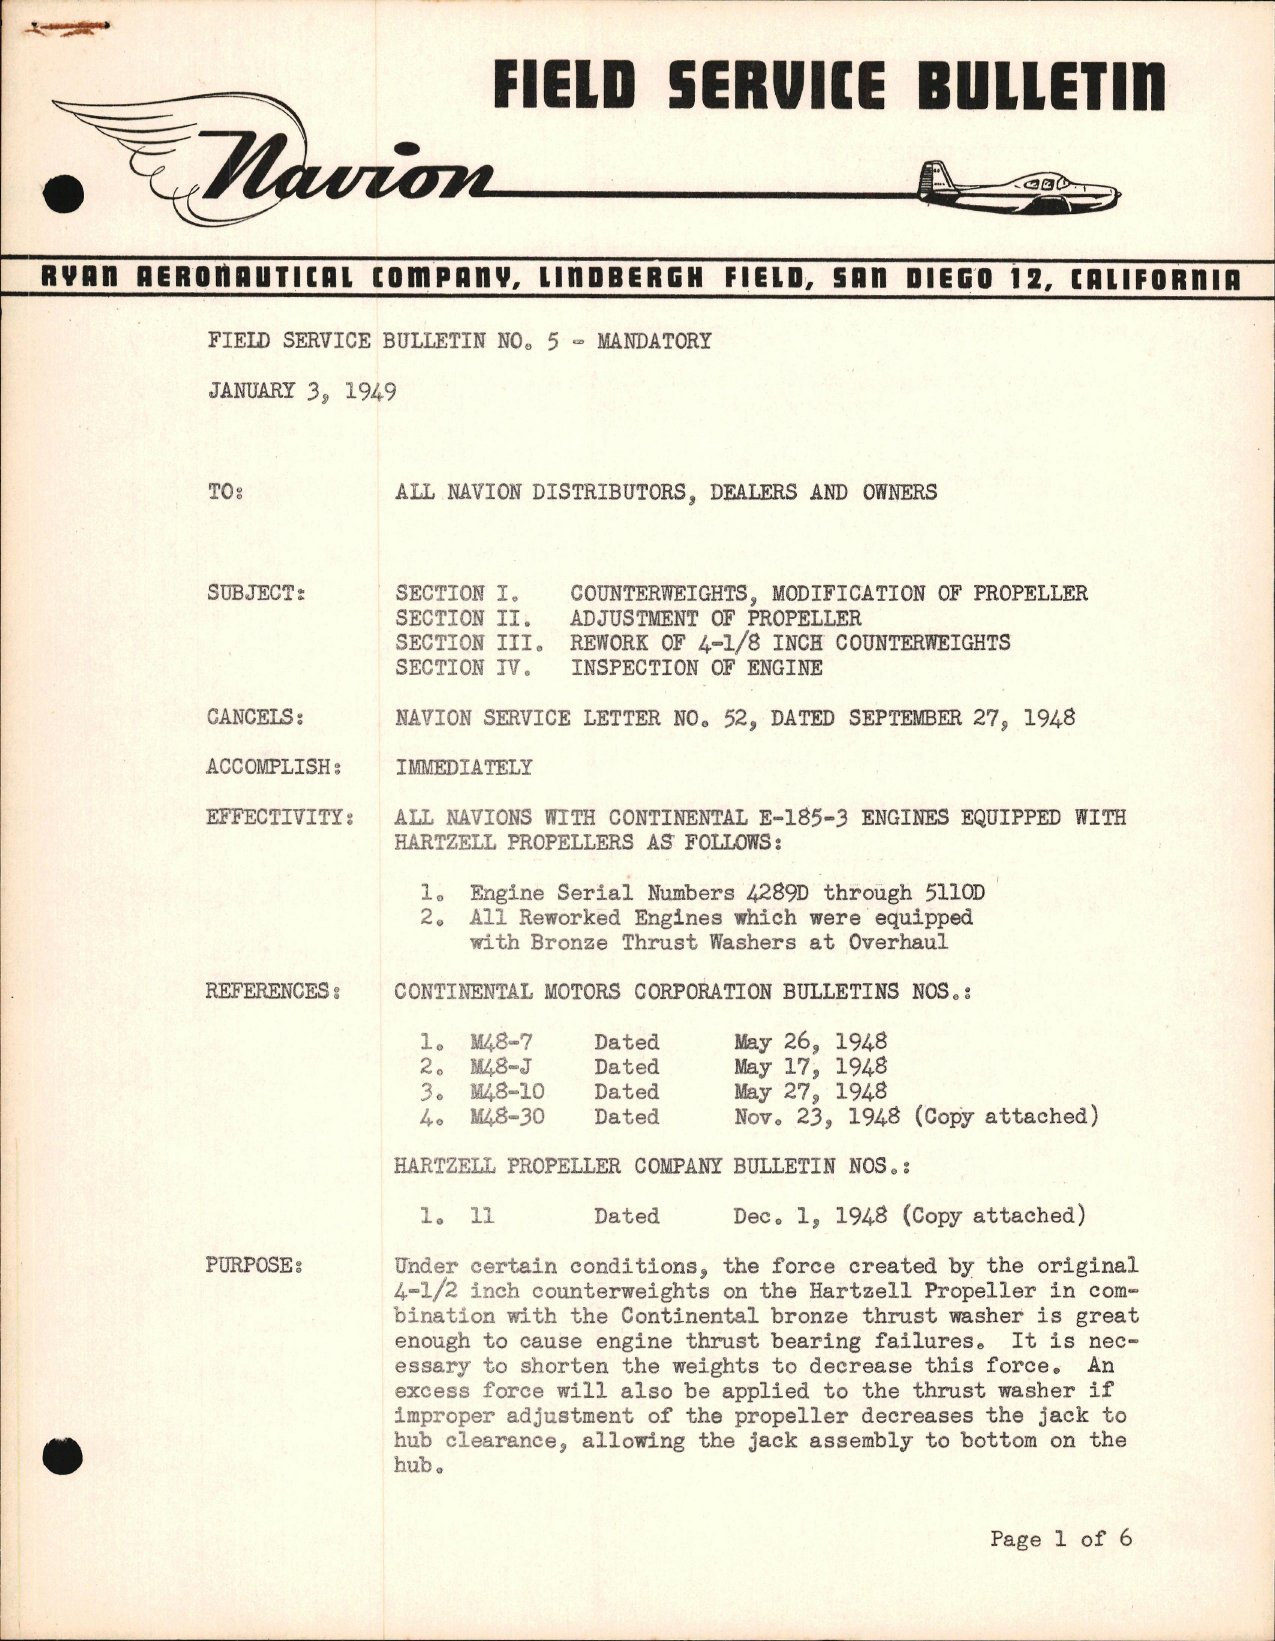 Sample page 1 from AirCorps Library document: Modification of Propeller Counterweights